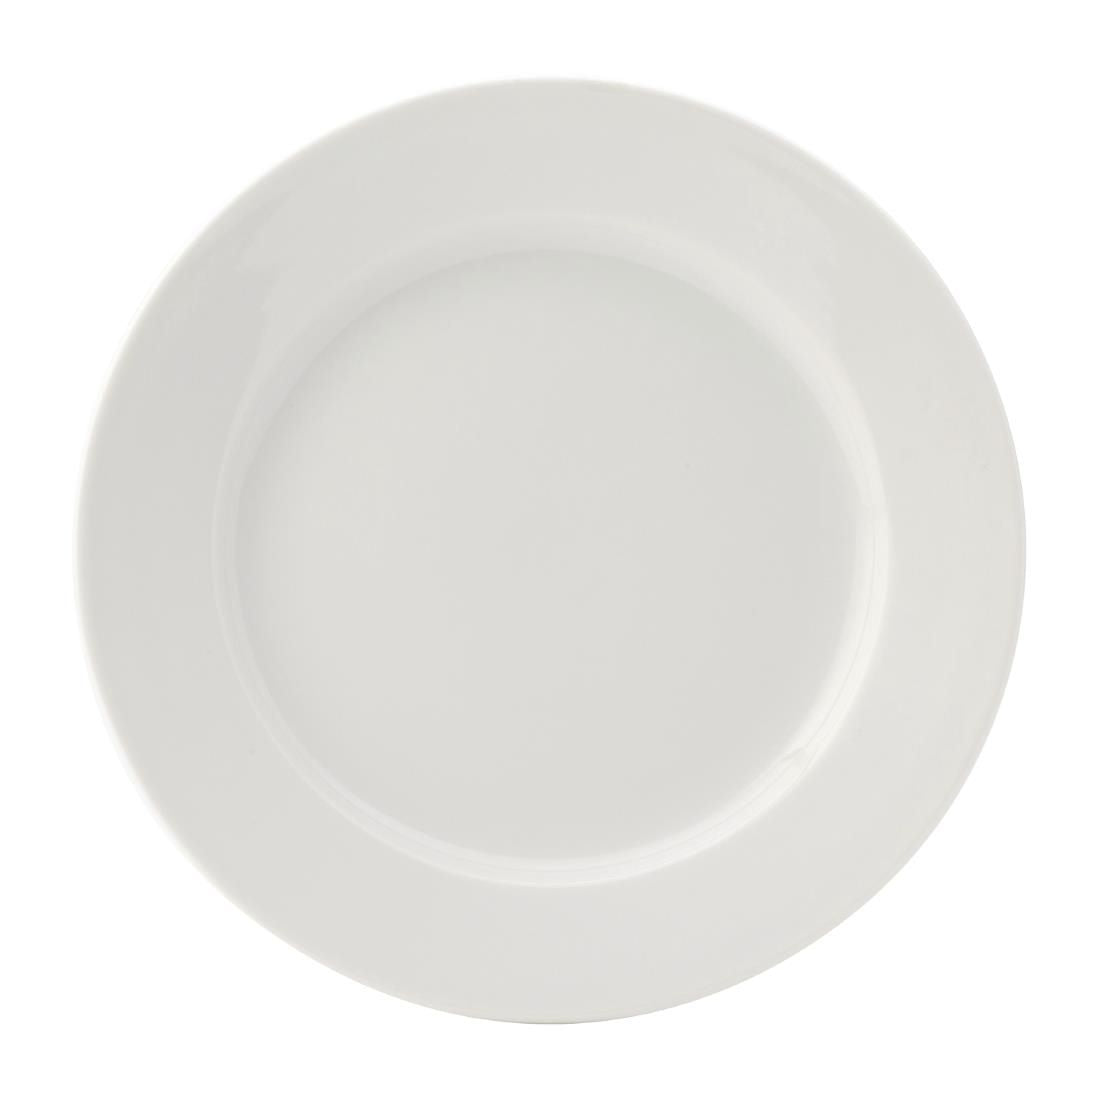 DY341 Utopia Titan Winged Plates White 190mm (Pack of 6)